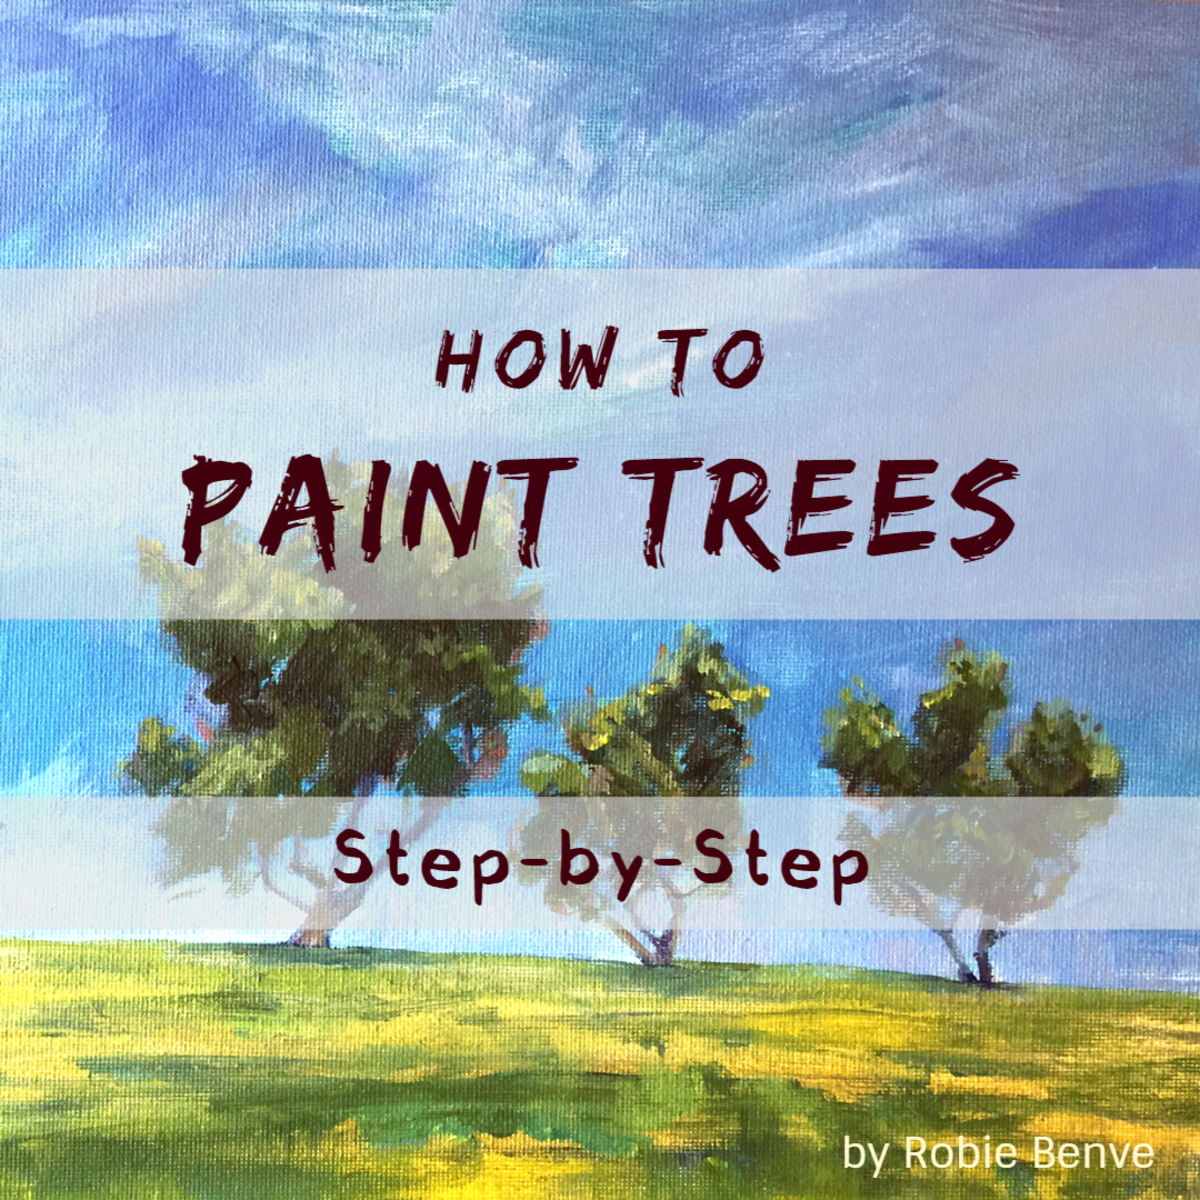 How to Paint Trees, Step by Step - FeltMagnet